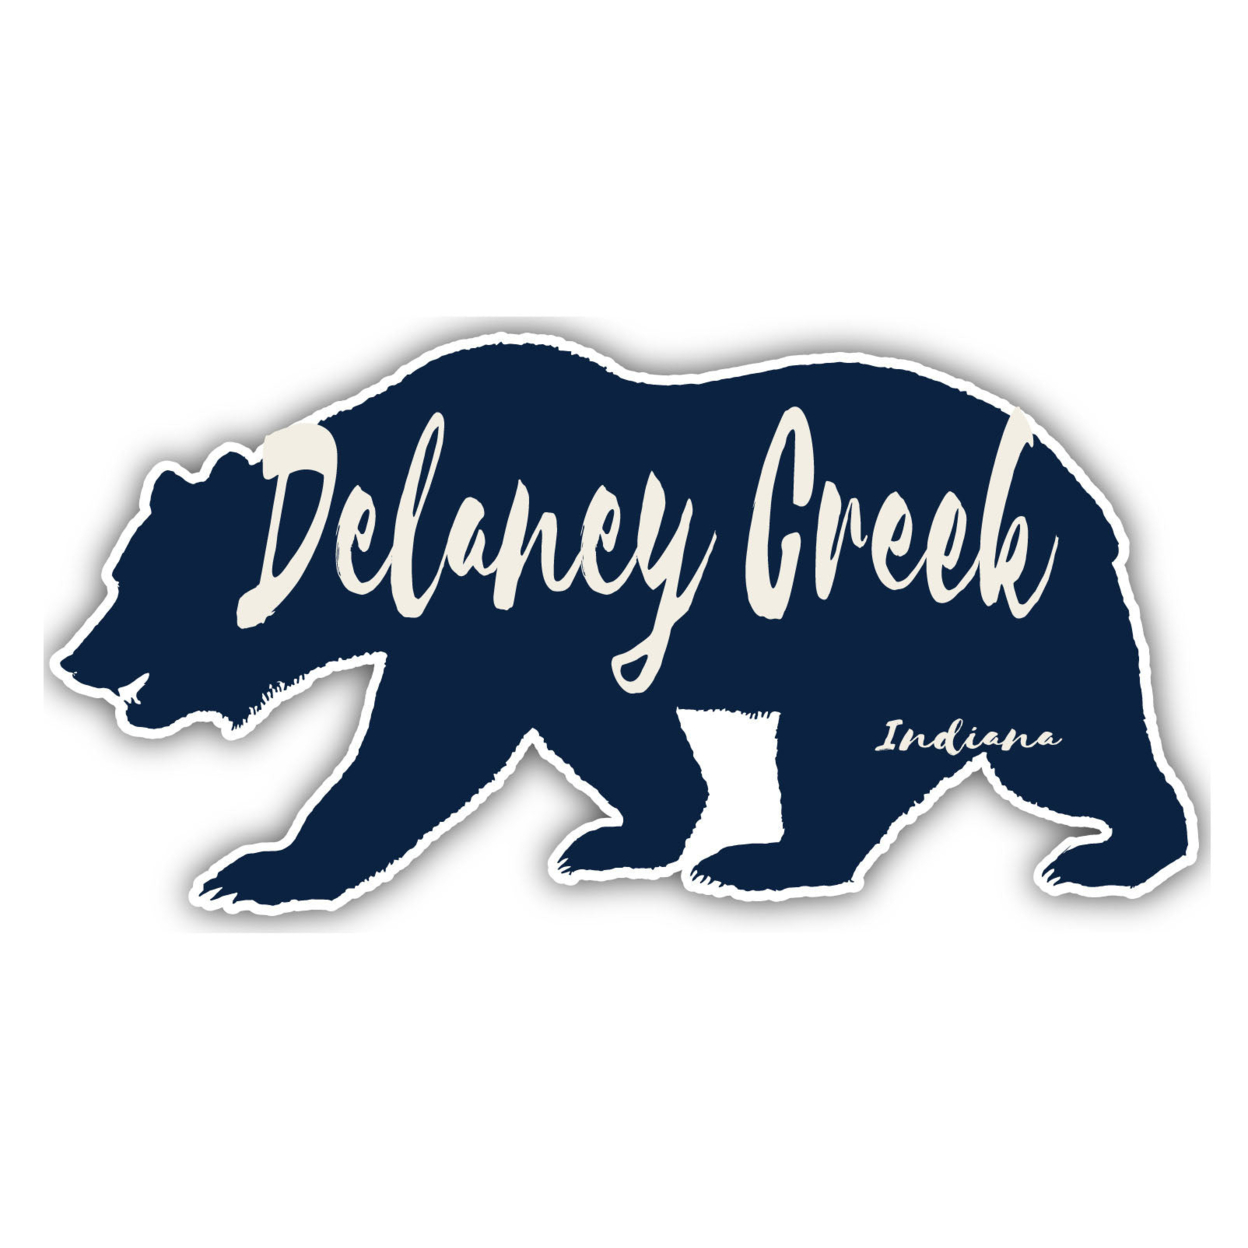 Delaney Creek Indiana Souvenir Decorative Stickers (Choose Theme And Size) - 4-Pack, 10-Inch, Bear